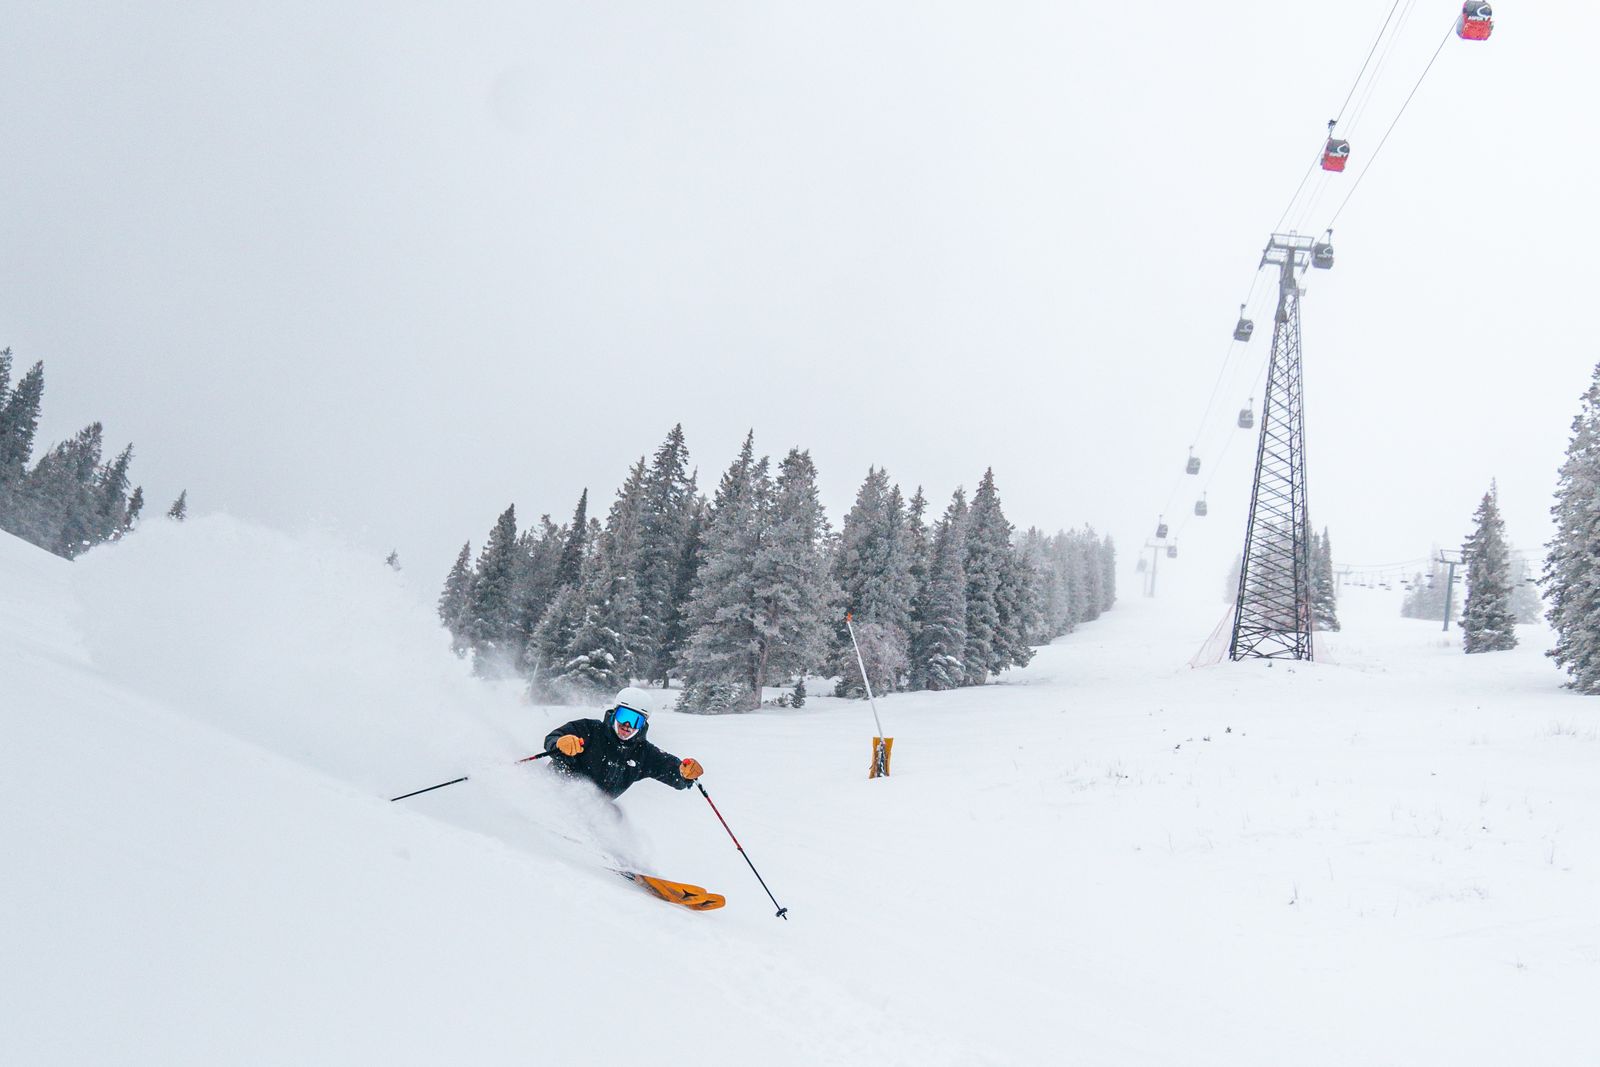 Oregon ski areas are still waiting for snow - OPB